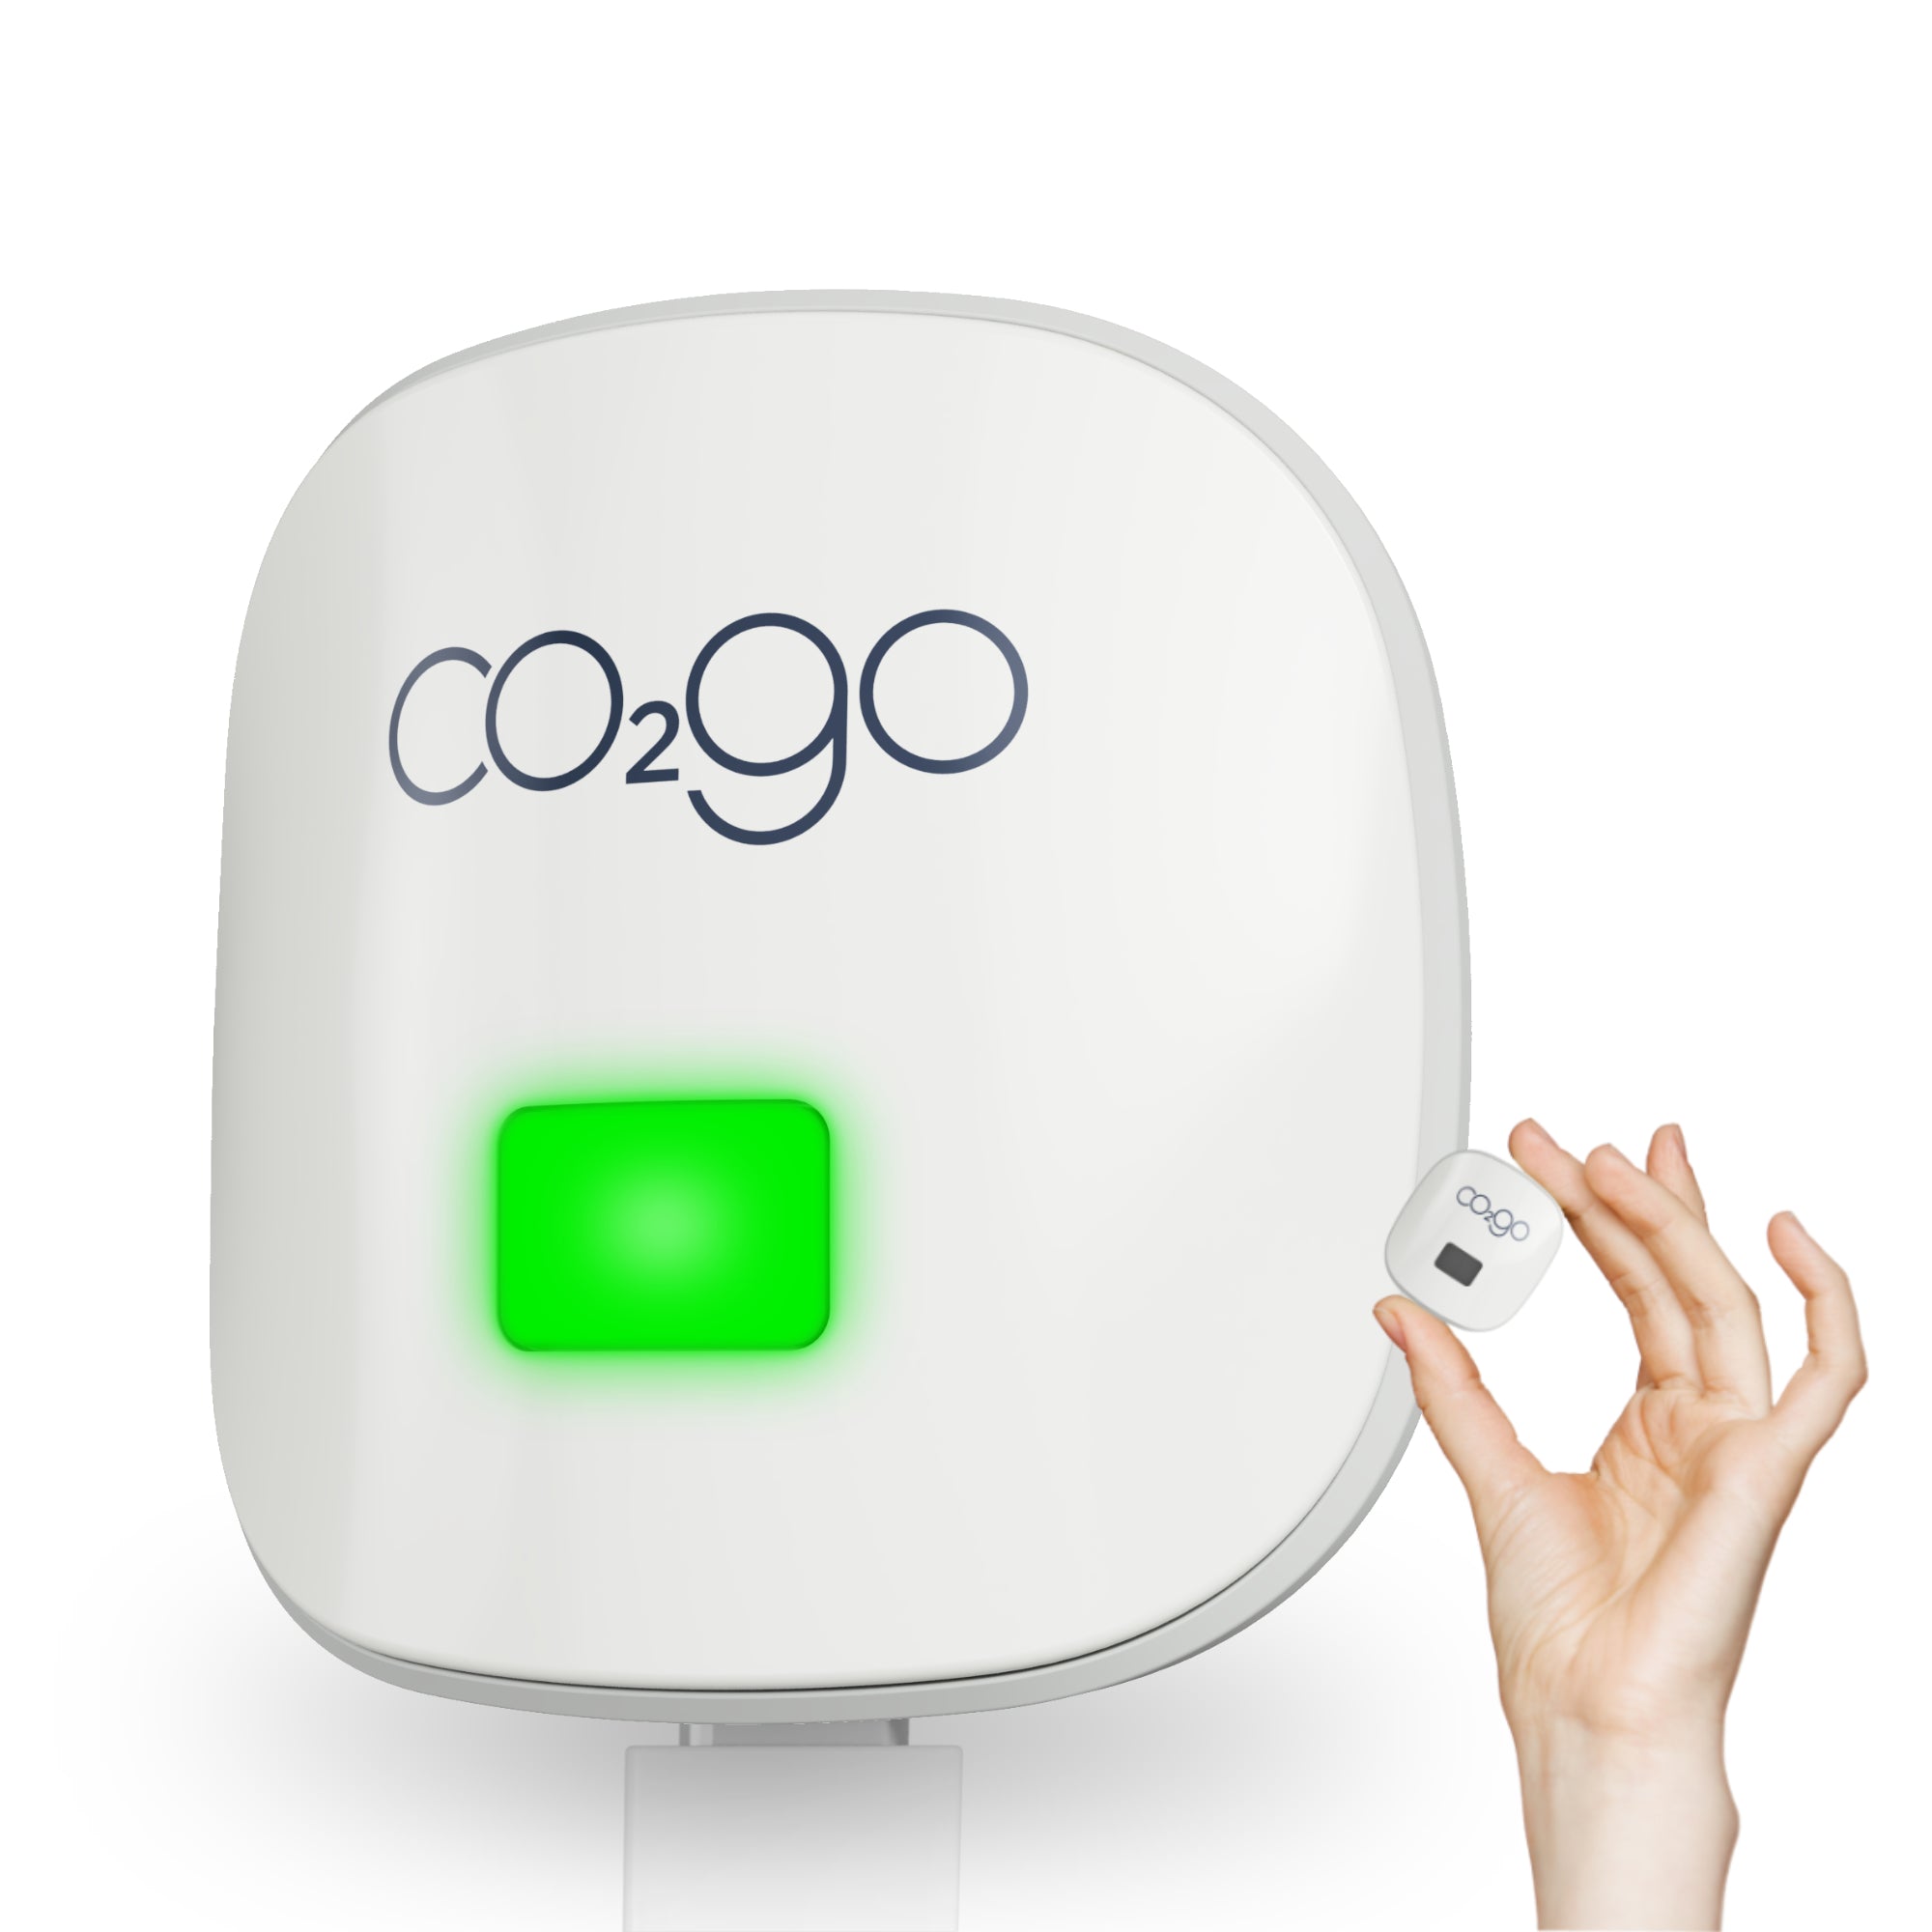 co₂go - your small companion, engineered and designed in Germany